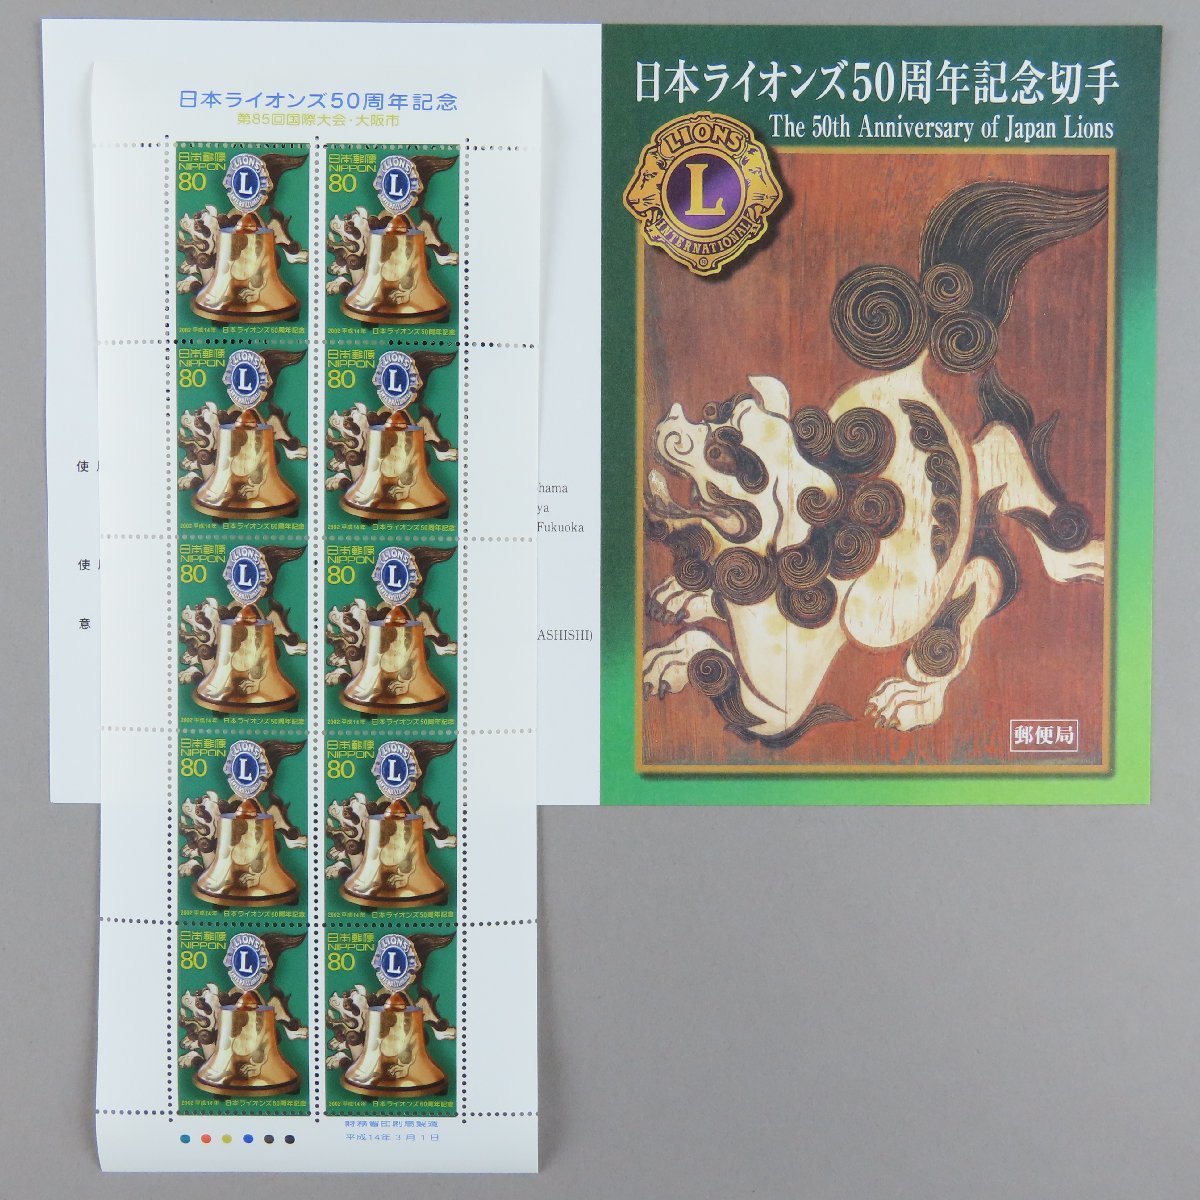 [ stamp 2675] Japan lion z50 anniversary commemoration 80 jpy 10 surface 1 seat instructions manual pamphlet 